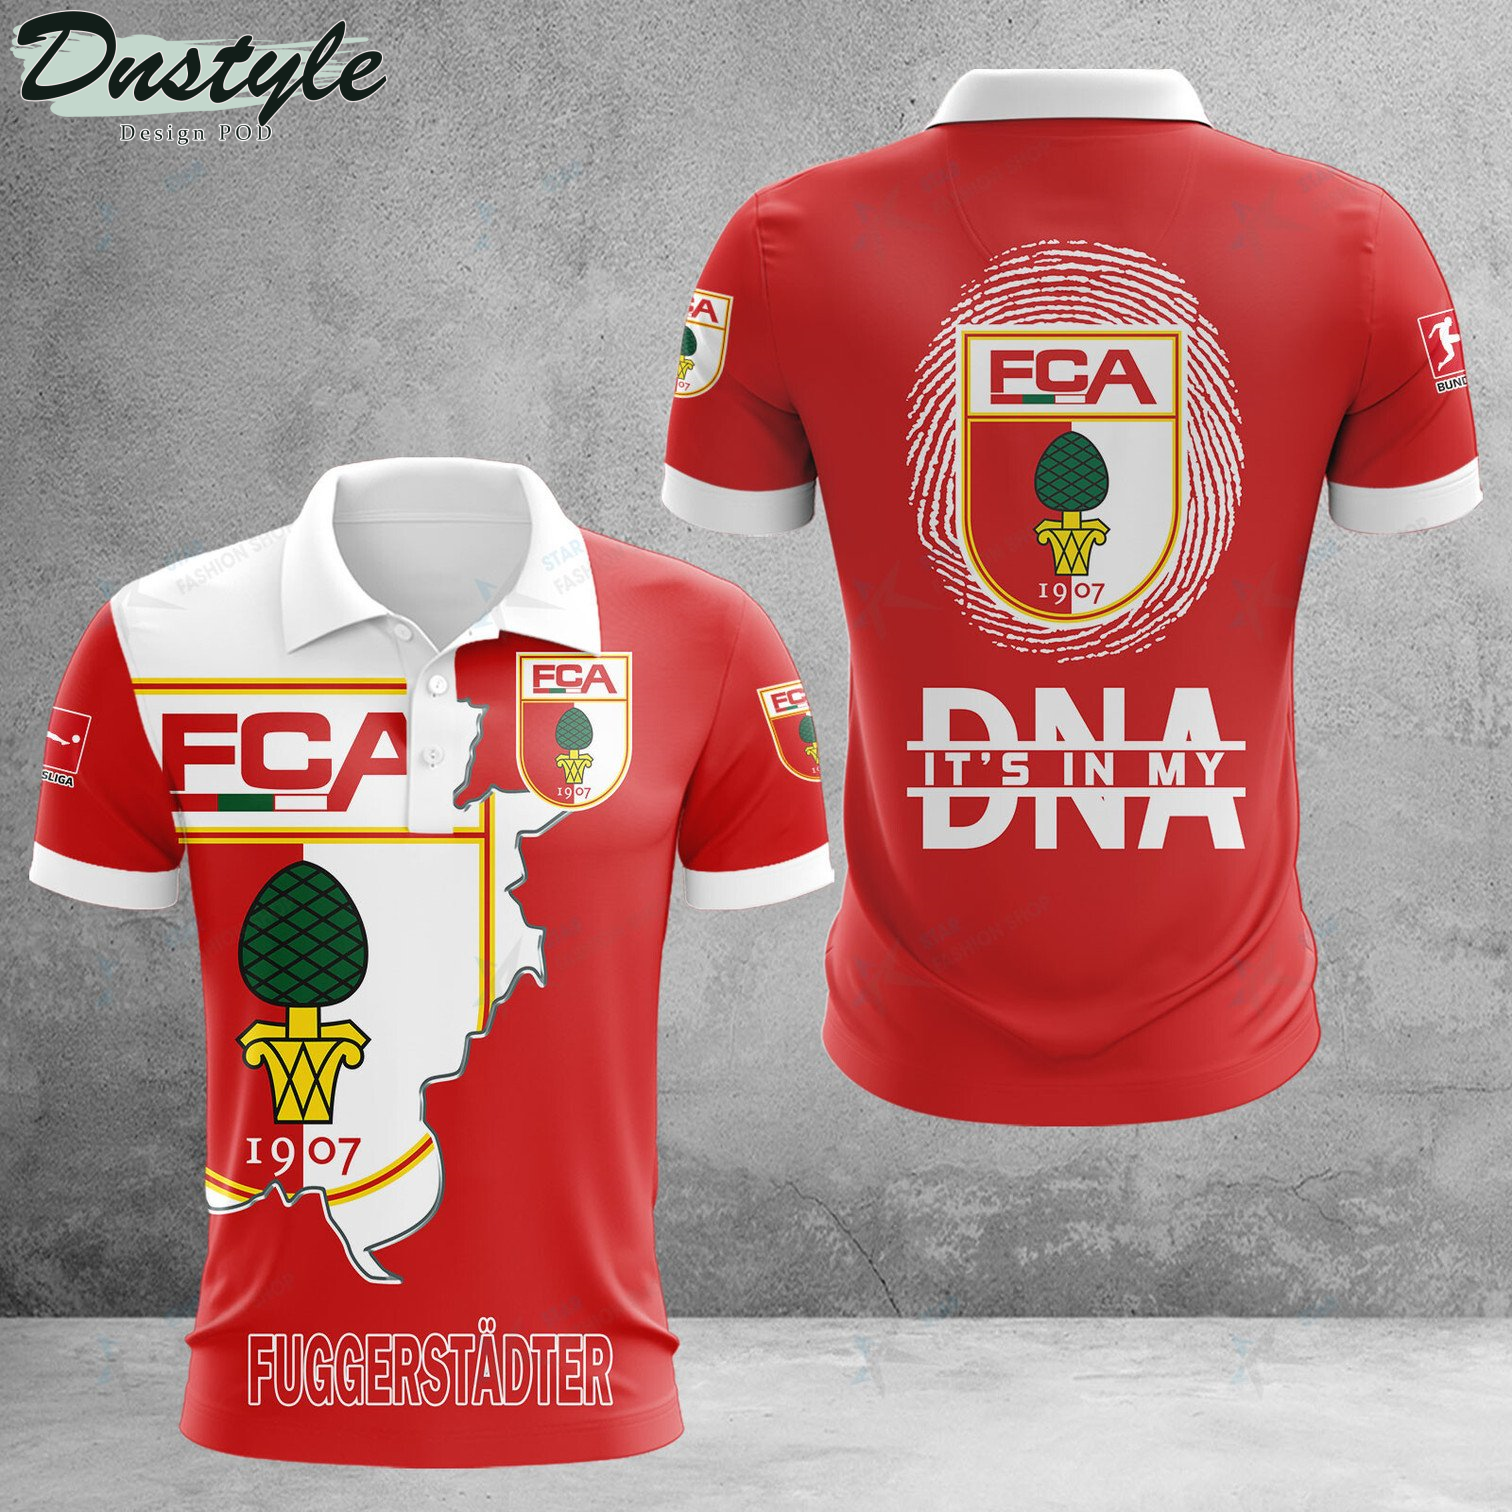 FC Augsburg it's in my DNA polo shirt